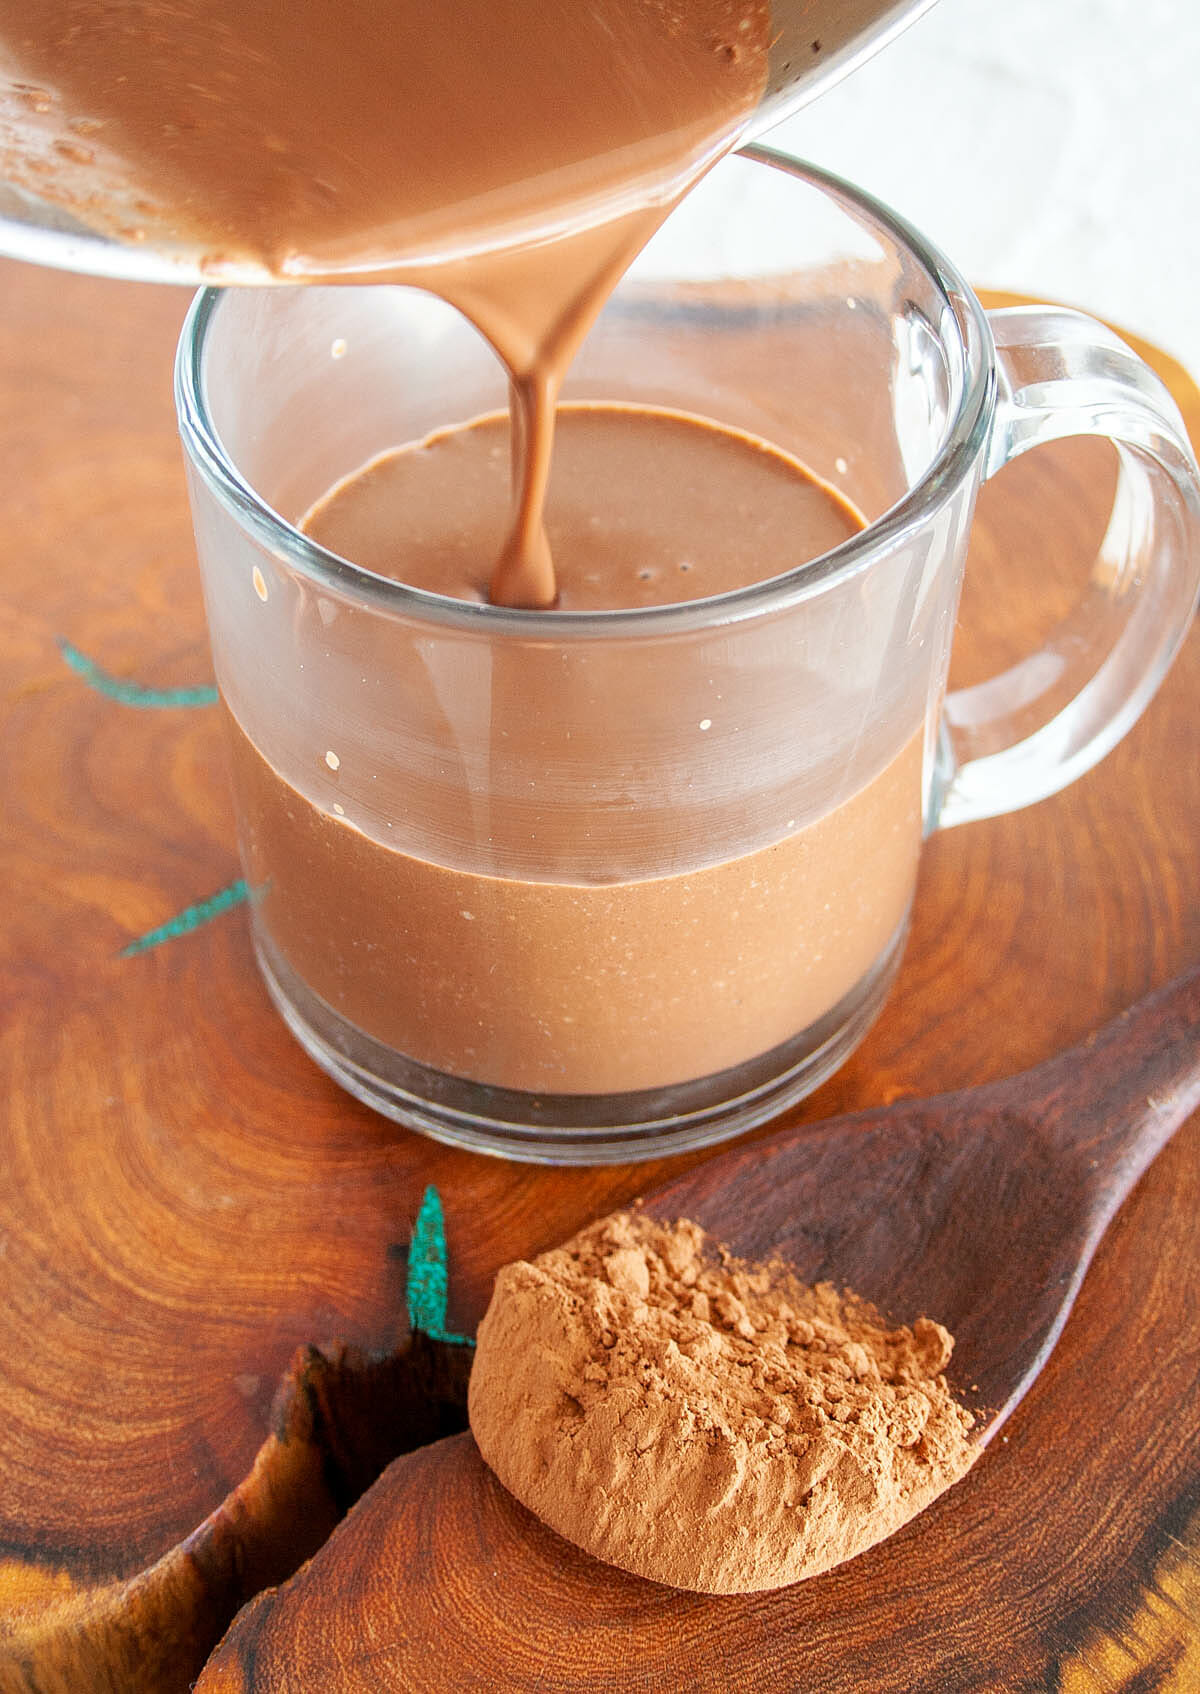 Spiced Hot Cocoa being poured into a glass mug.